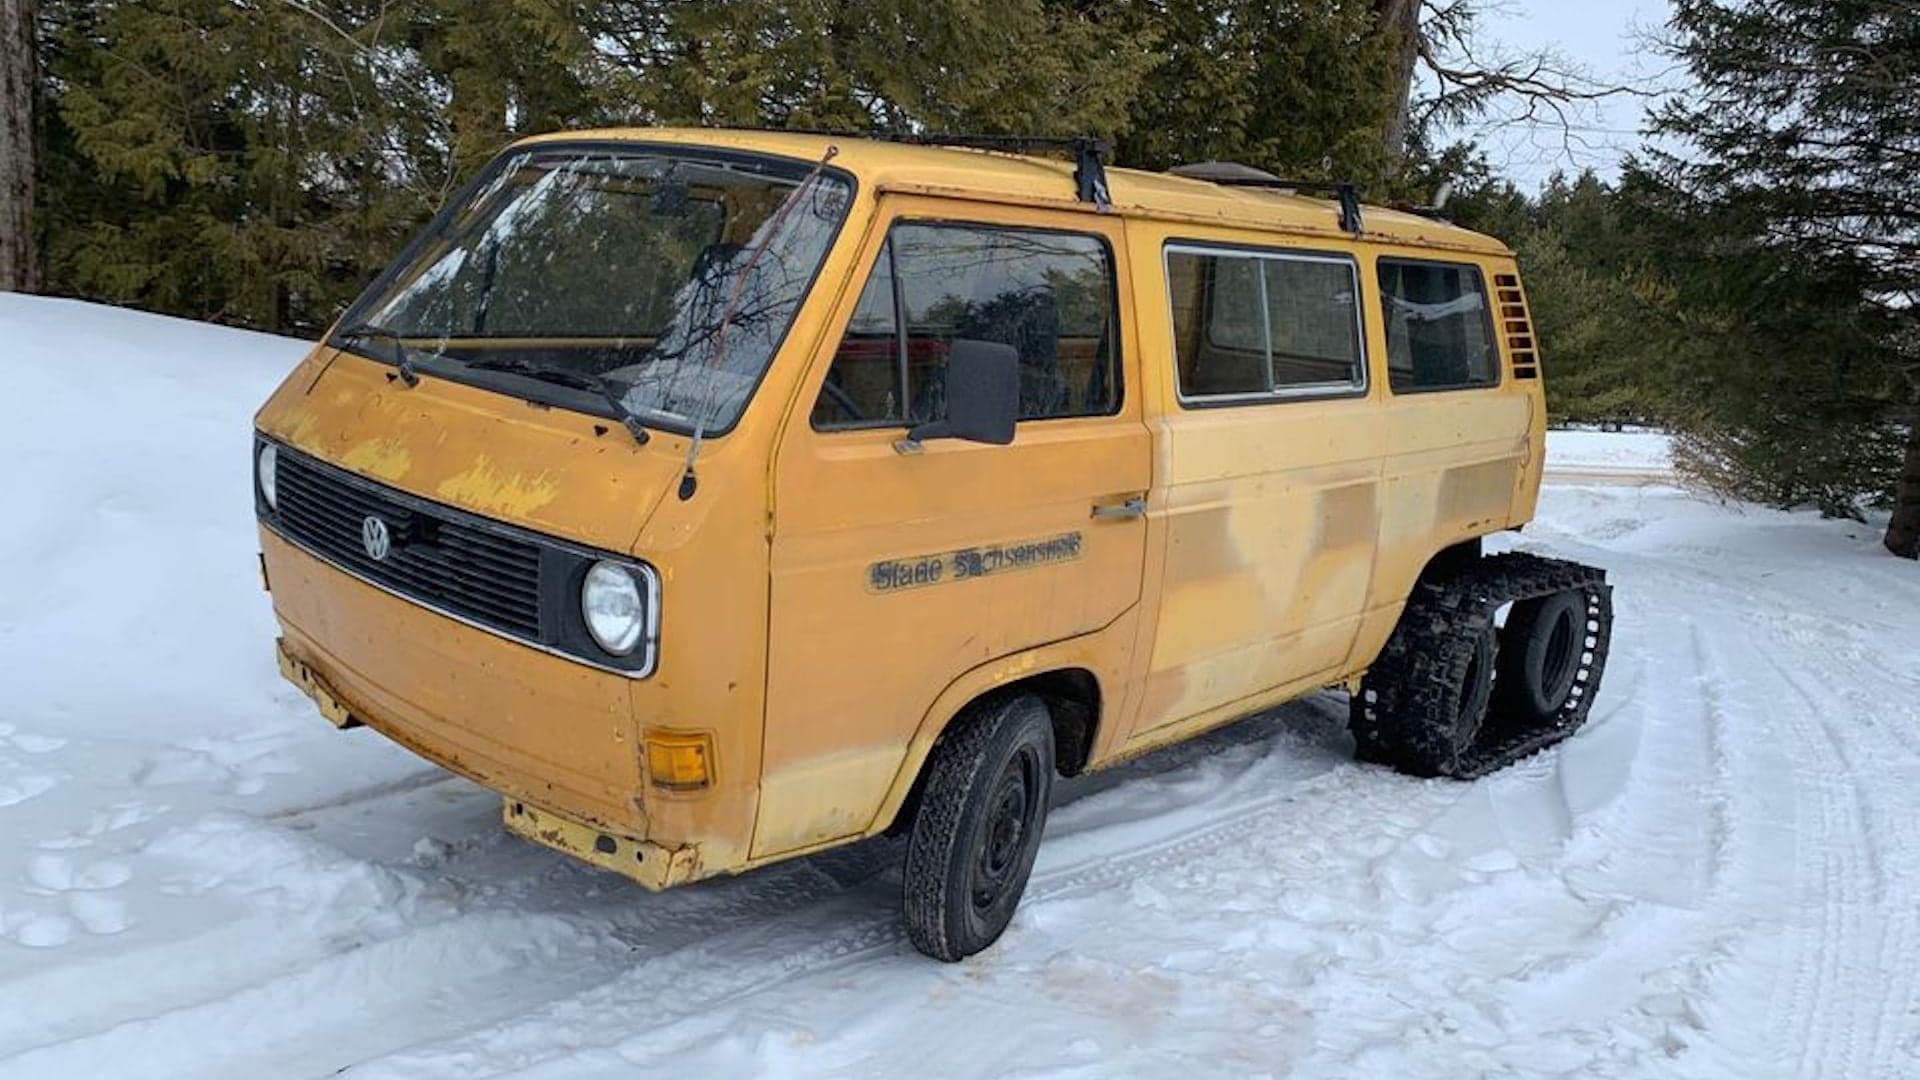 ’80s VW Vanagon With Homebuilt Tracks and Exhaust Griddle Is Your $2,500 Ticket to Adventure